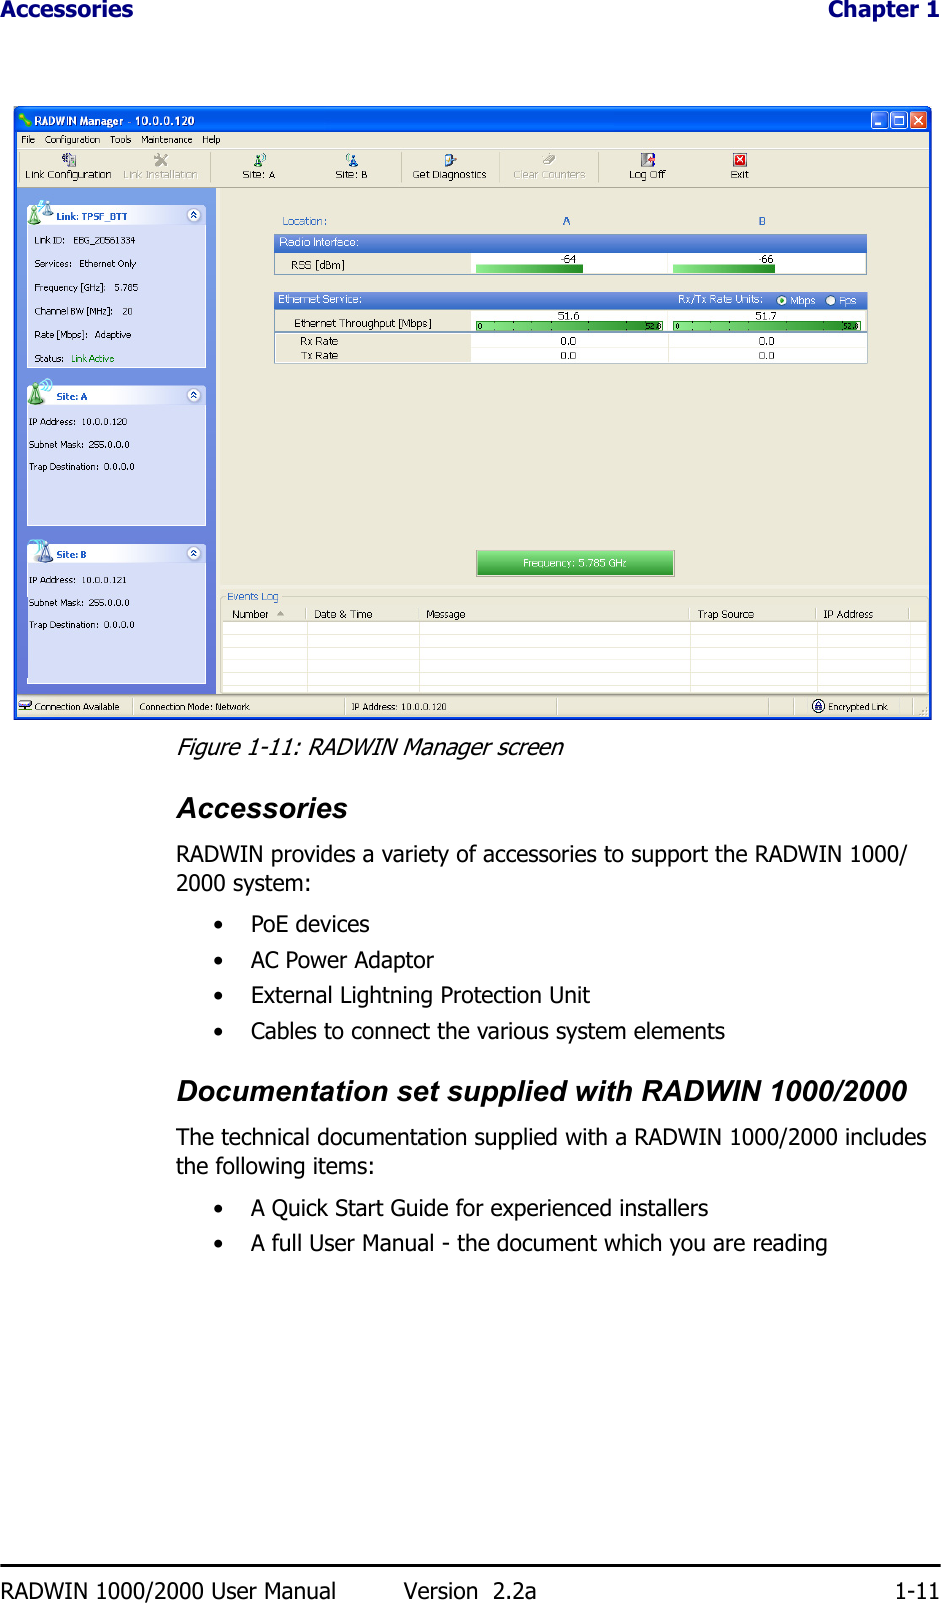 Accessories  Chapter 1RADWIN 1000/2000 User Manual Version  2.2a 1-11Figure 1-11: RADWIN Manager screenAccessoriesRADWIN provides a variety of accessories to support the RADWIN 1000/2000 system:•PoE devices•AC Power Adaptor• External Lightning Protection Unit• Cables to connect the various system elementsDocumentation set supplied with RADWIN 1000/2000The technical documentation supplied with a RADWIN 1000/2000 includes the following items:• A Quick Start Guide for experienced installers• A full User Manual - the document which you are reading